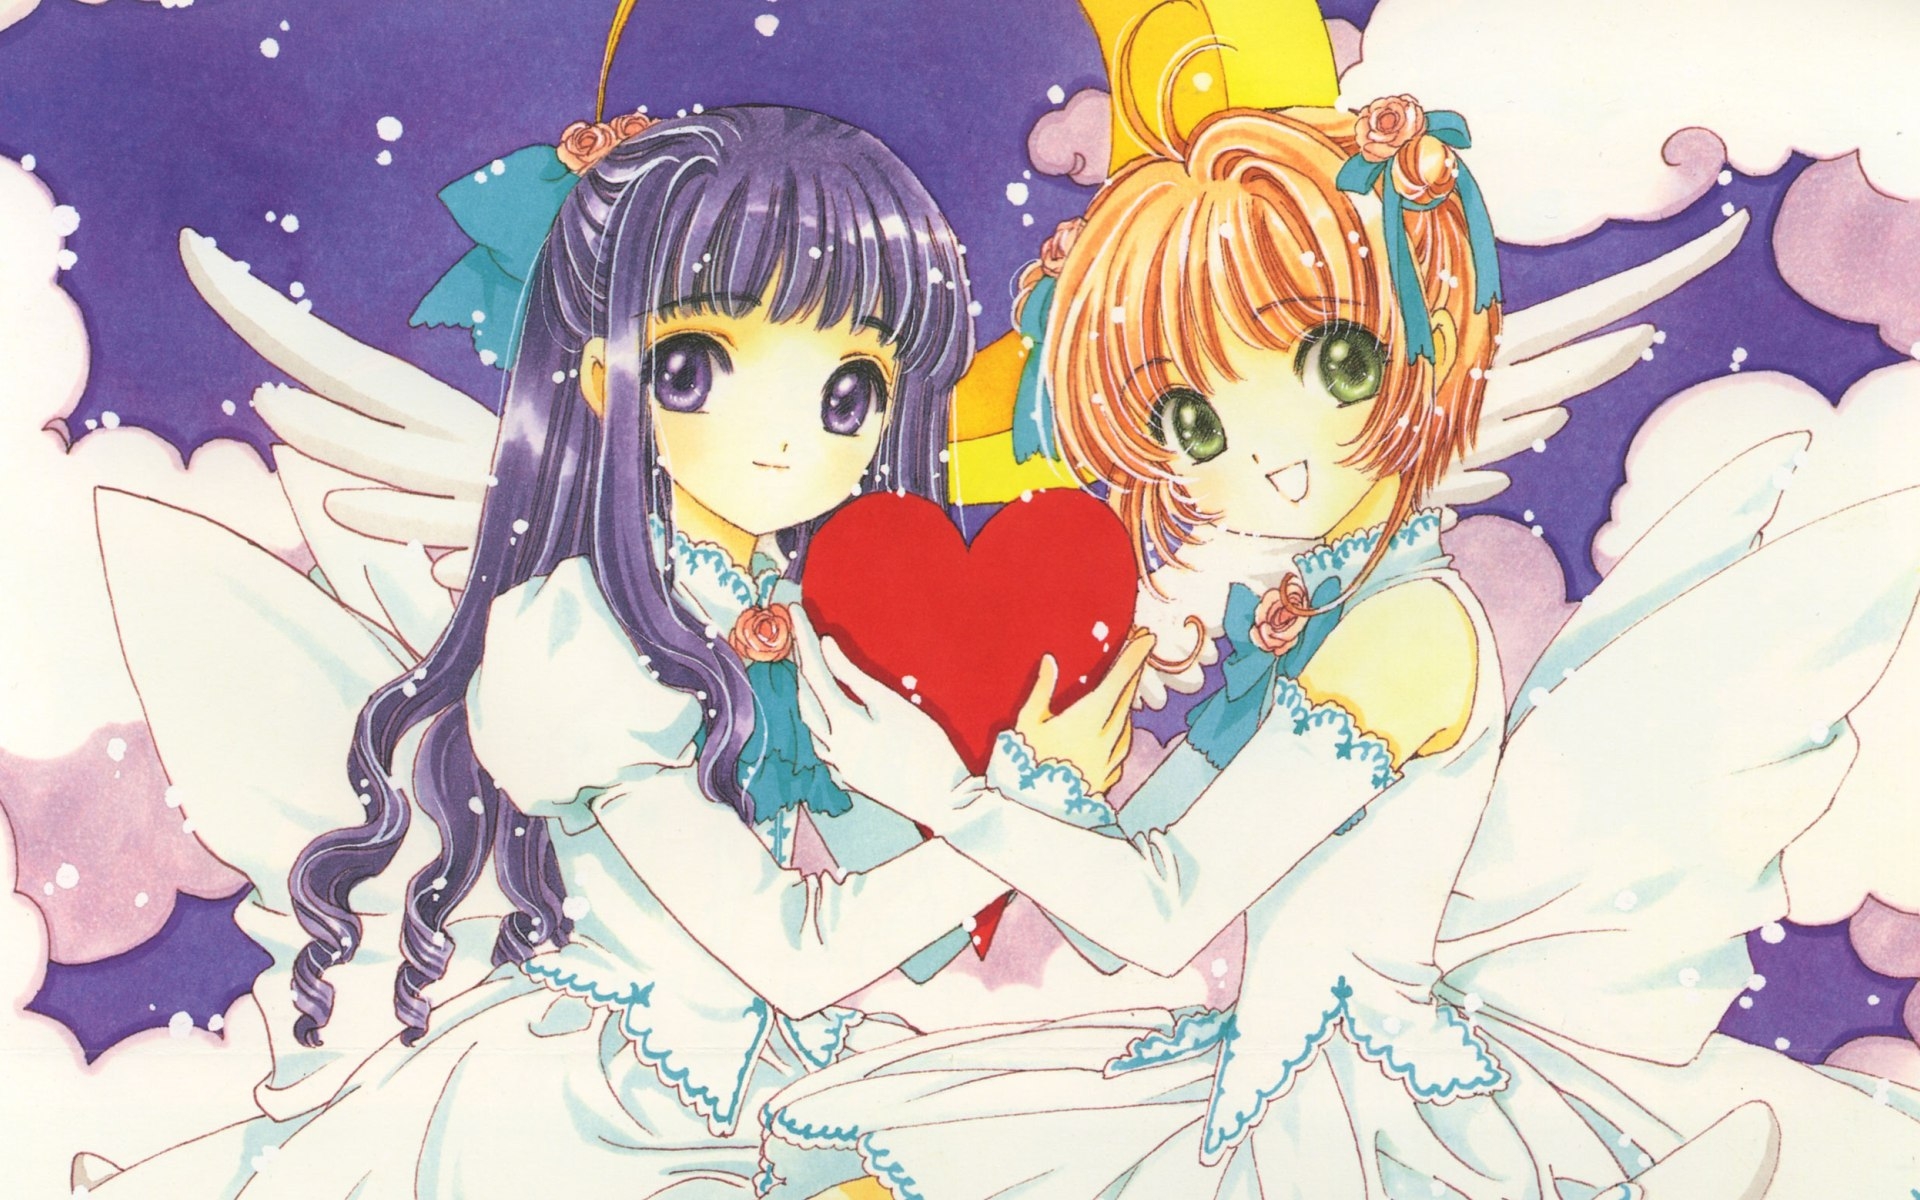 The Sakura and Tomoyo Relationship: Revisited